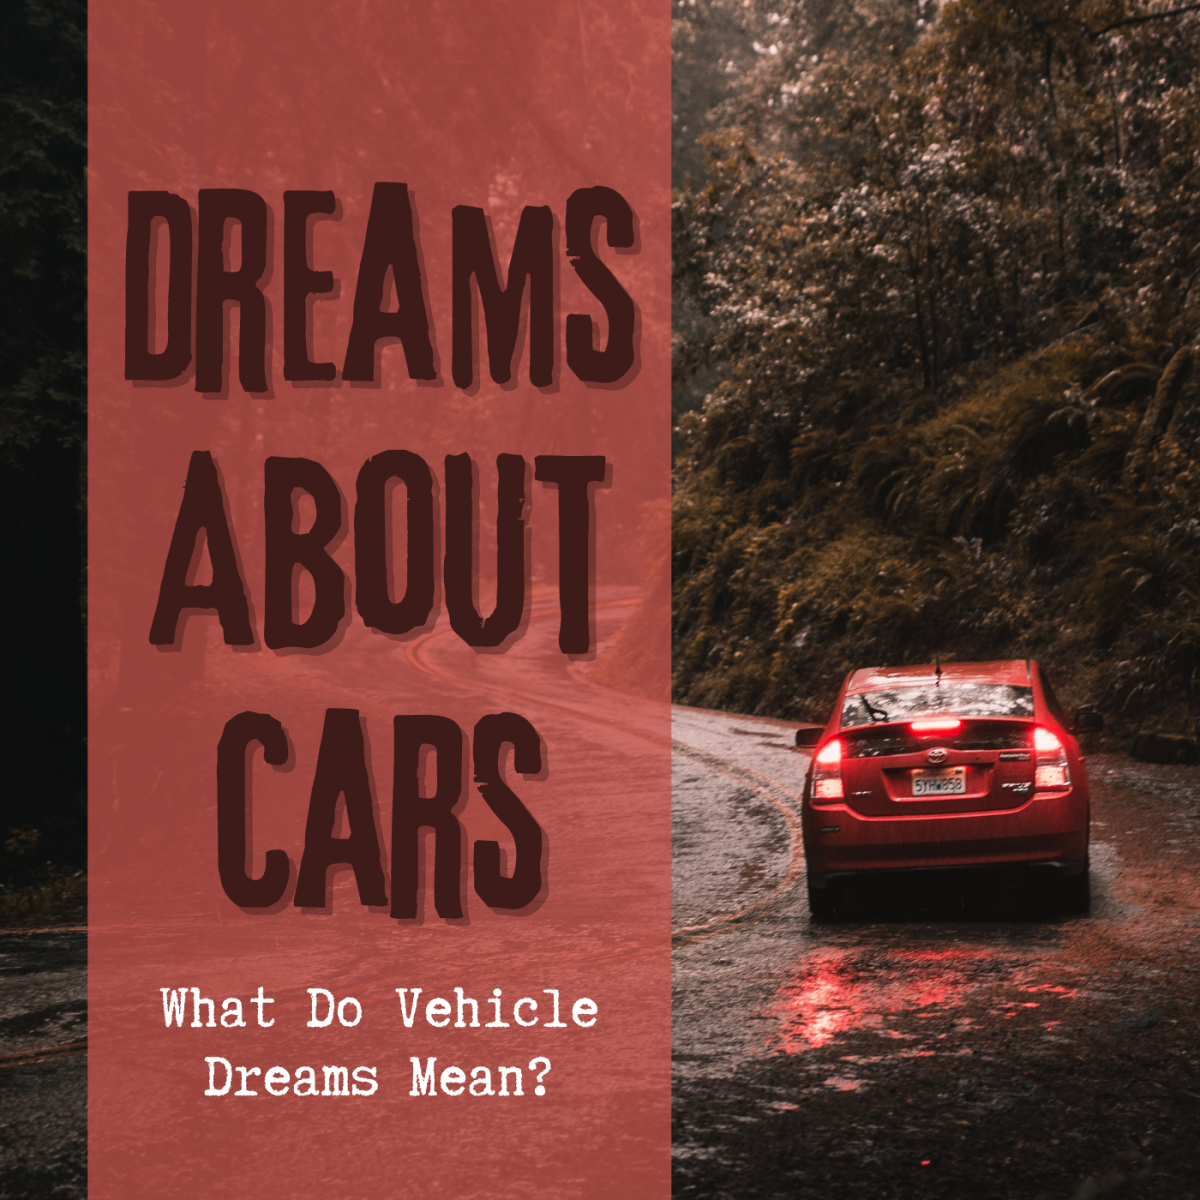 Did you have a dream about cars, trucks, or driving? Discover some potential interpretations of your dream.